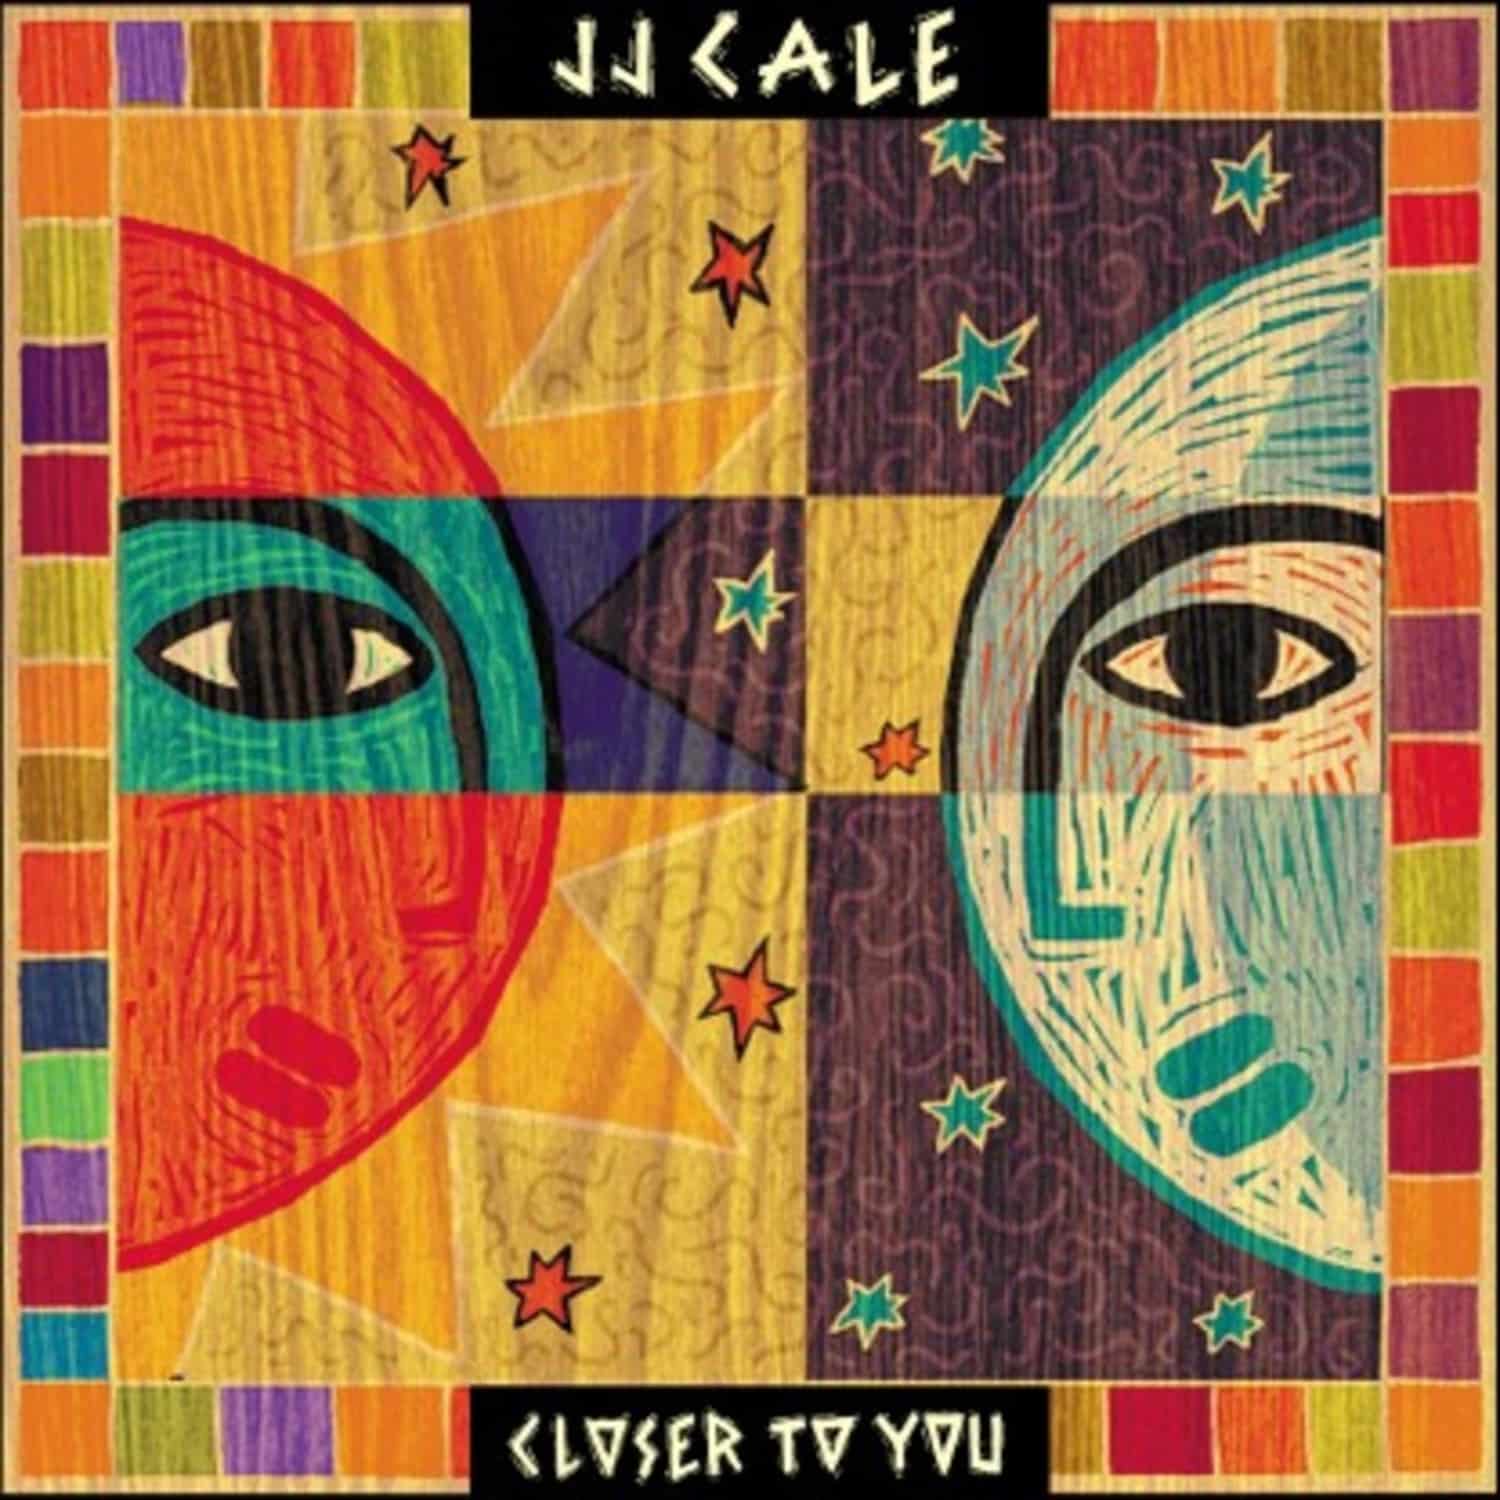 JJ Cale - CLOSER TO YOU 